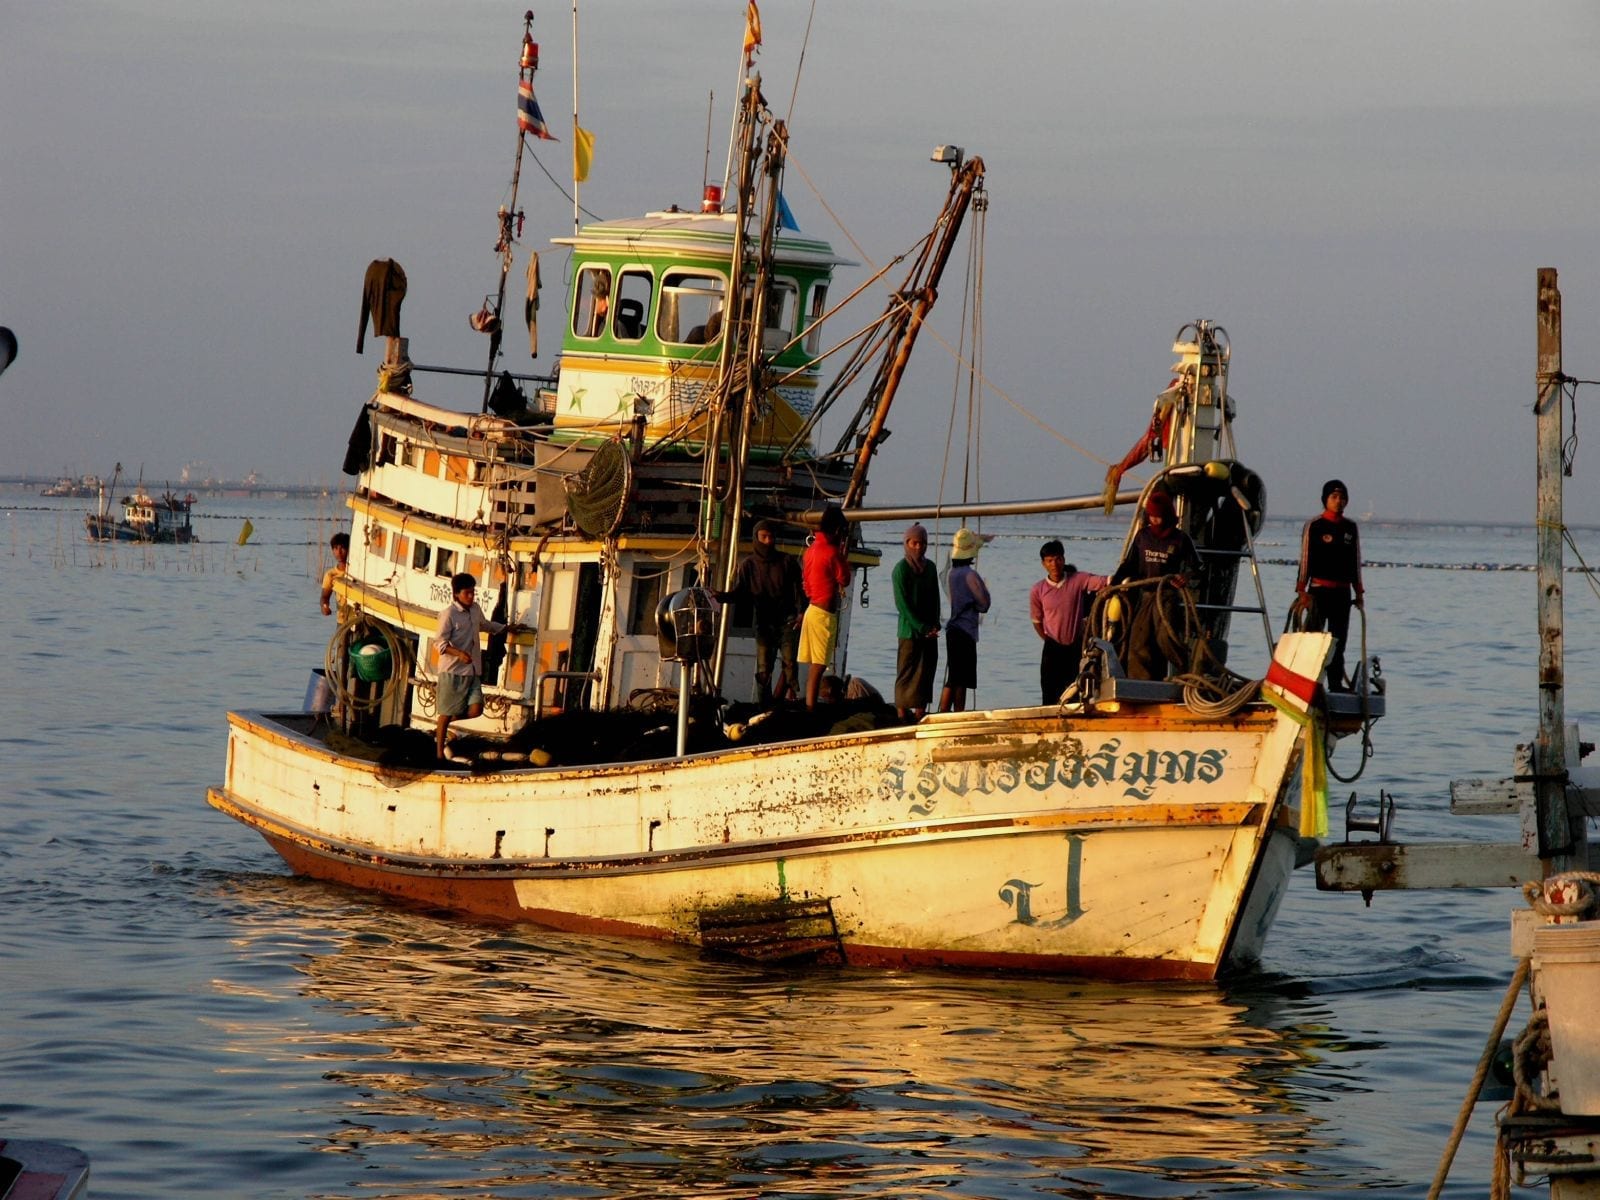 Improving Human Rights in the Seafood Supply Chain